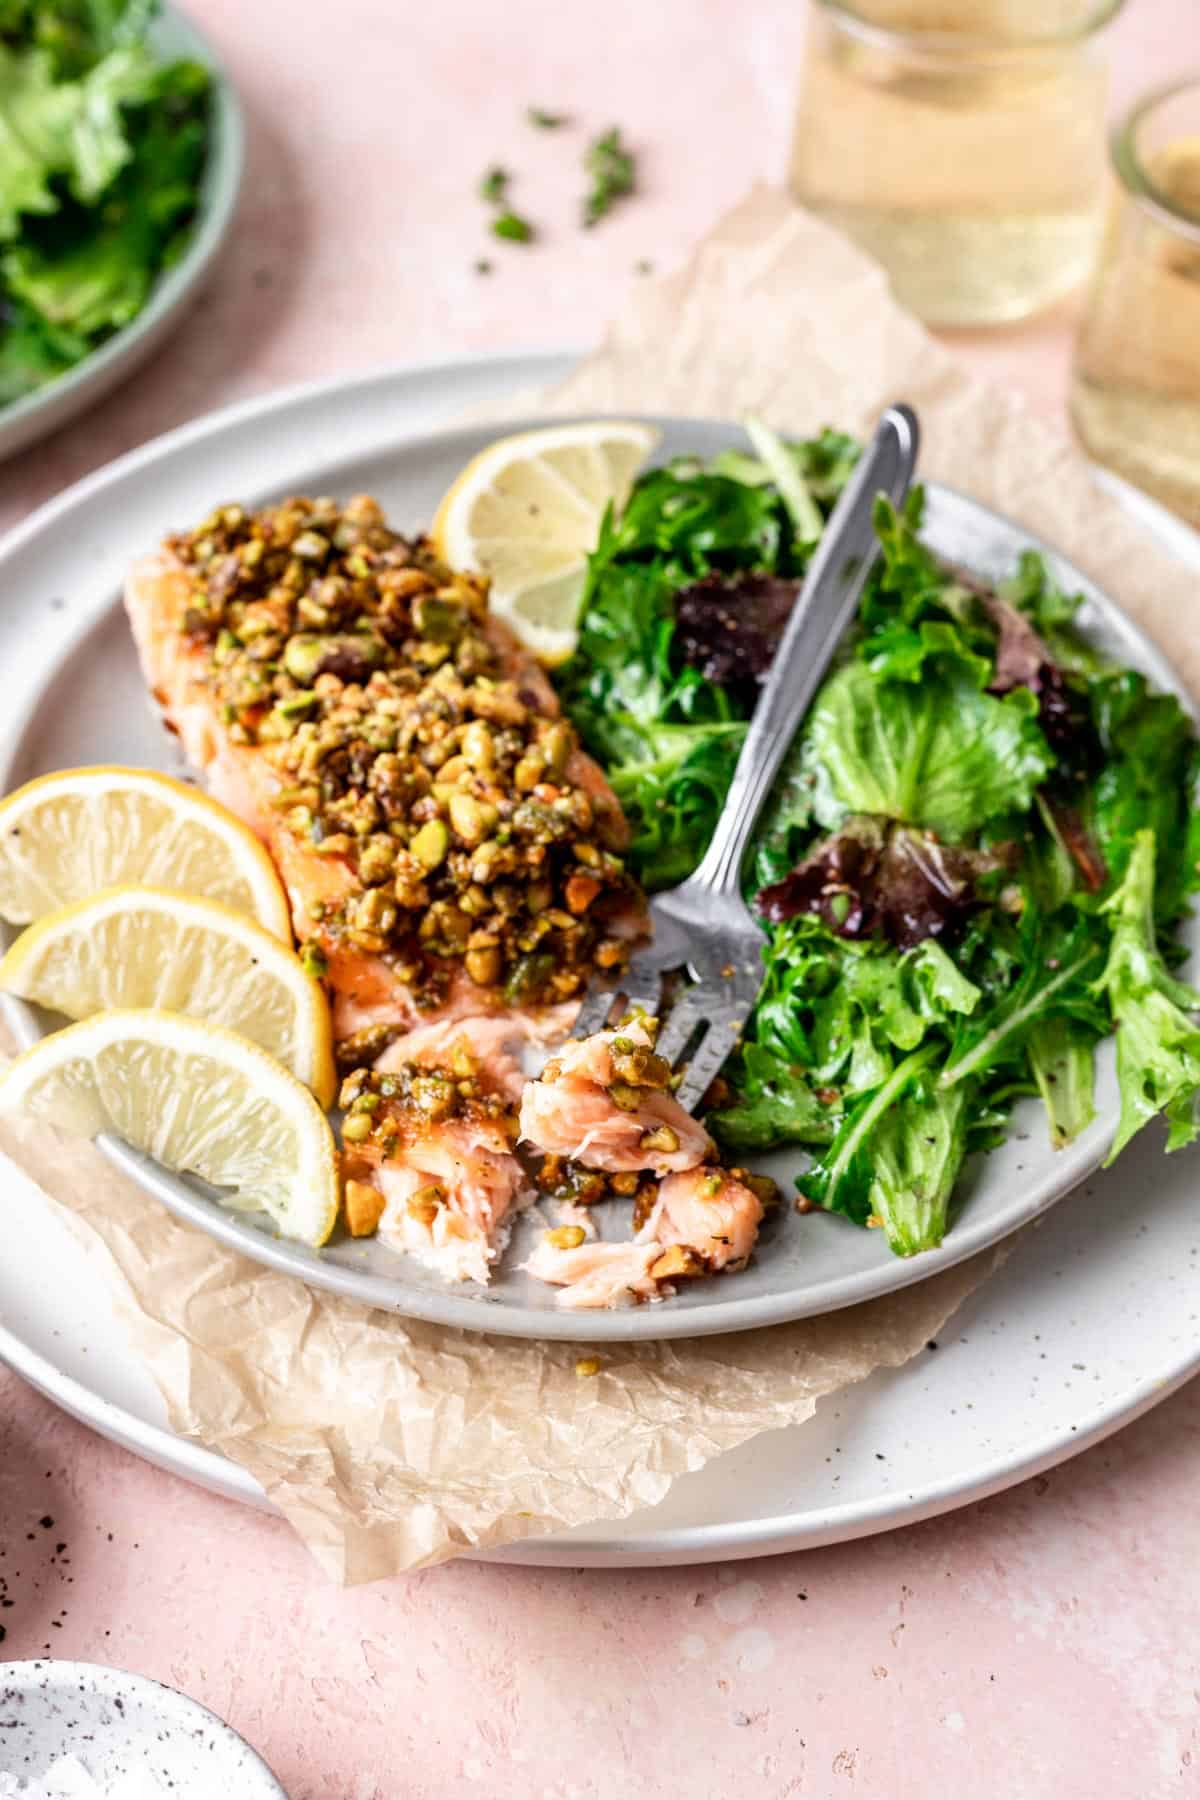 Pistachio crusted salmon on a plate with a side salad and a fork.